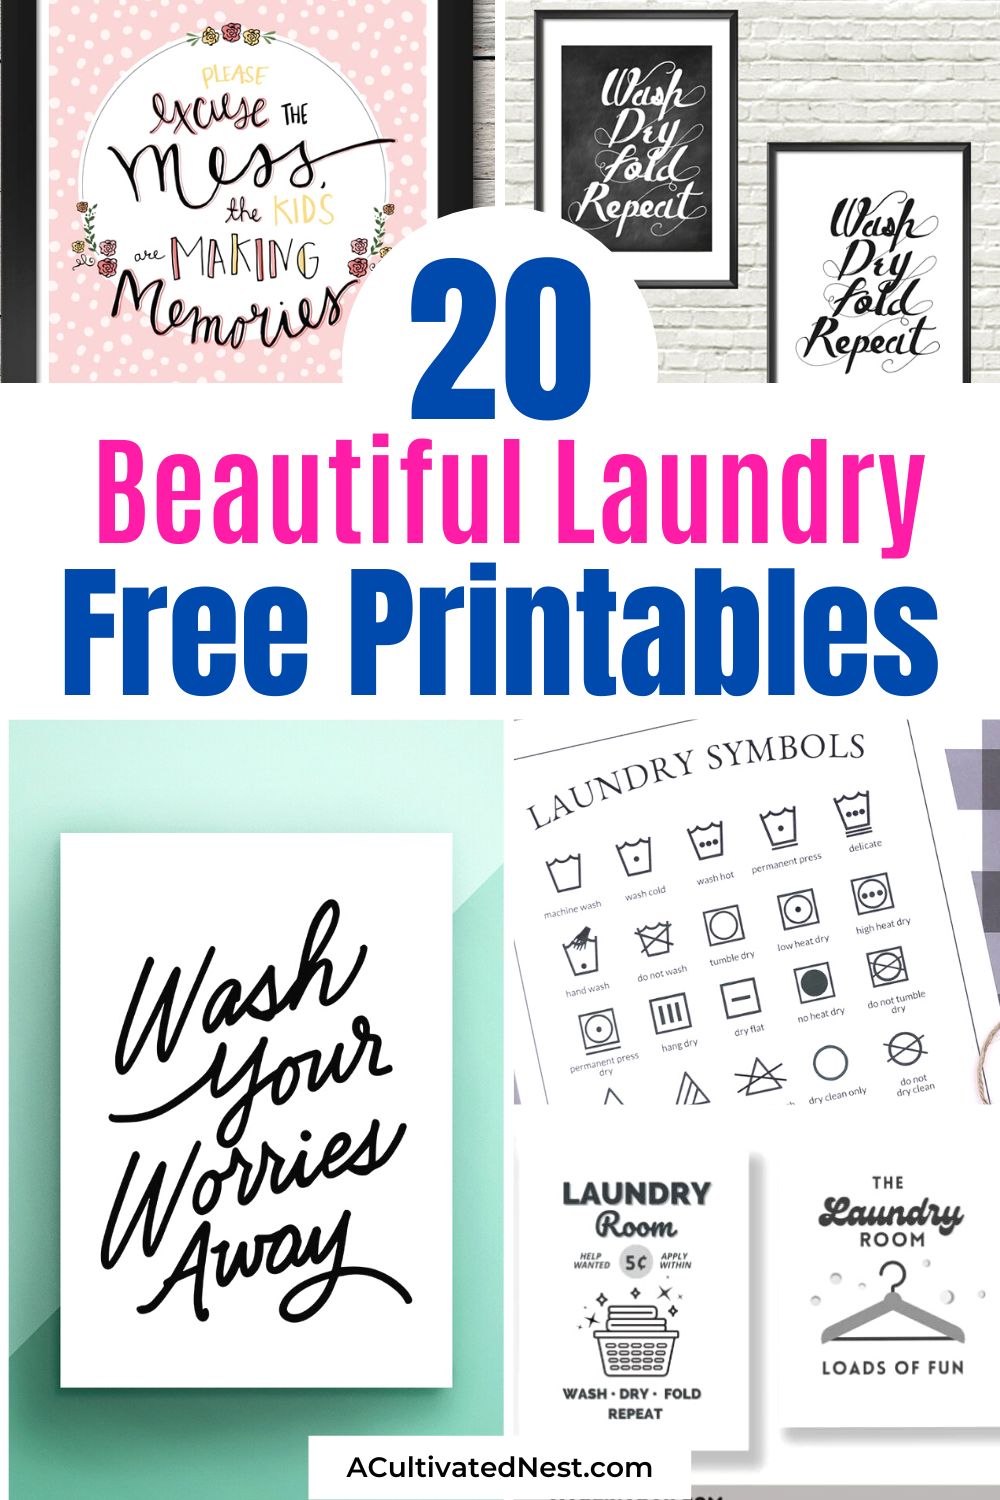 20 Pretty Free Laundry Room Printables- Spruce up your laundry room on a budget with these beautiful free laundry room printables. You may not love all the laundry, but these might make it better! | #freePrintables #printable #laundryRoom #laundryPrintables #ACultivatedNest